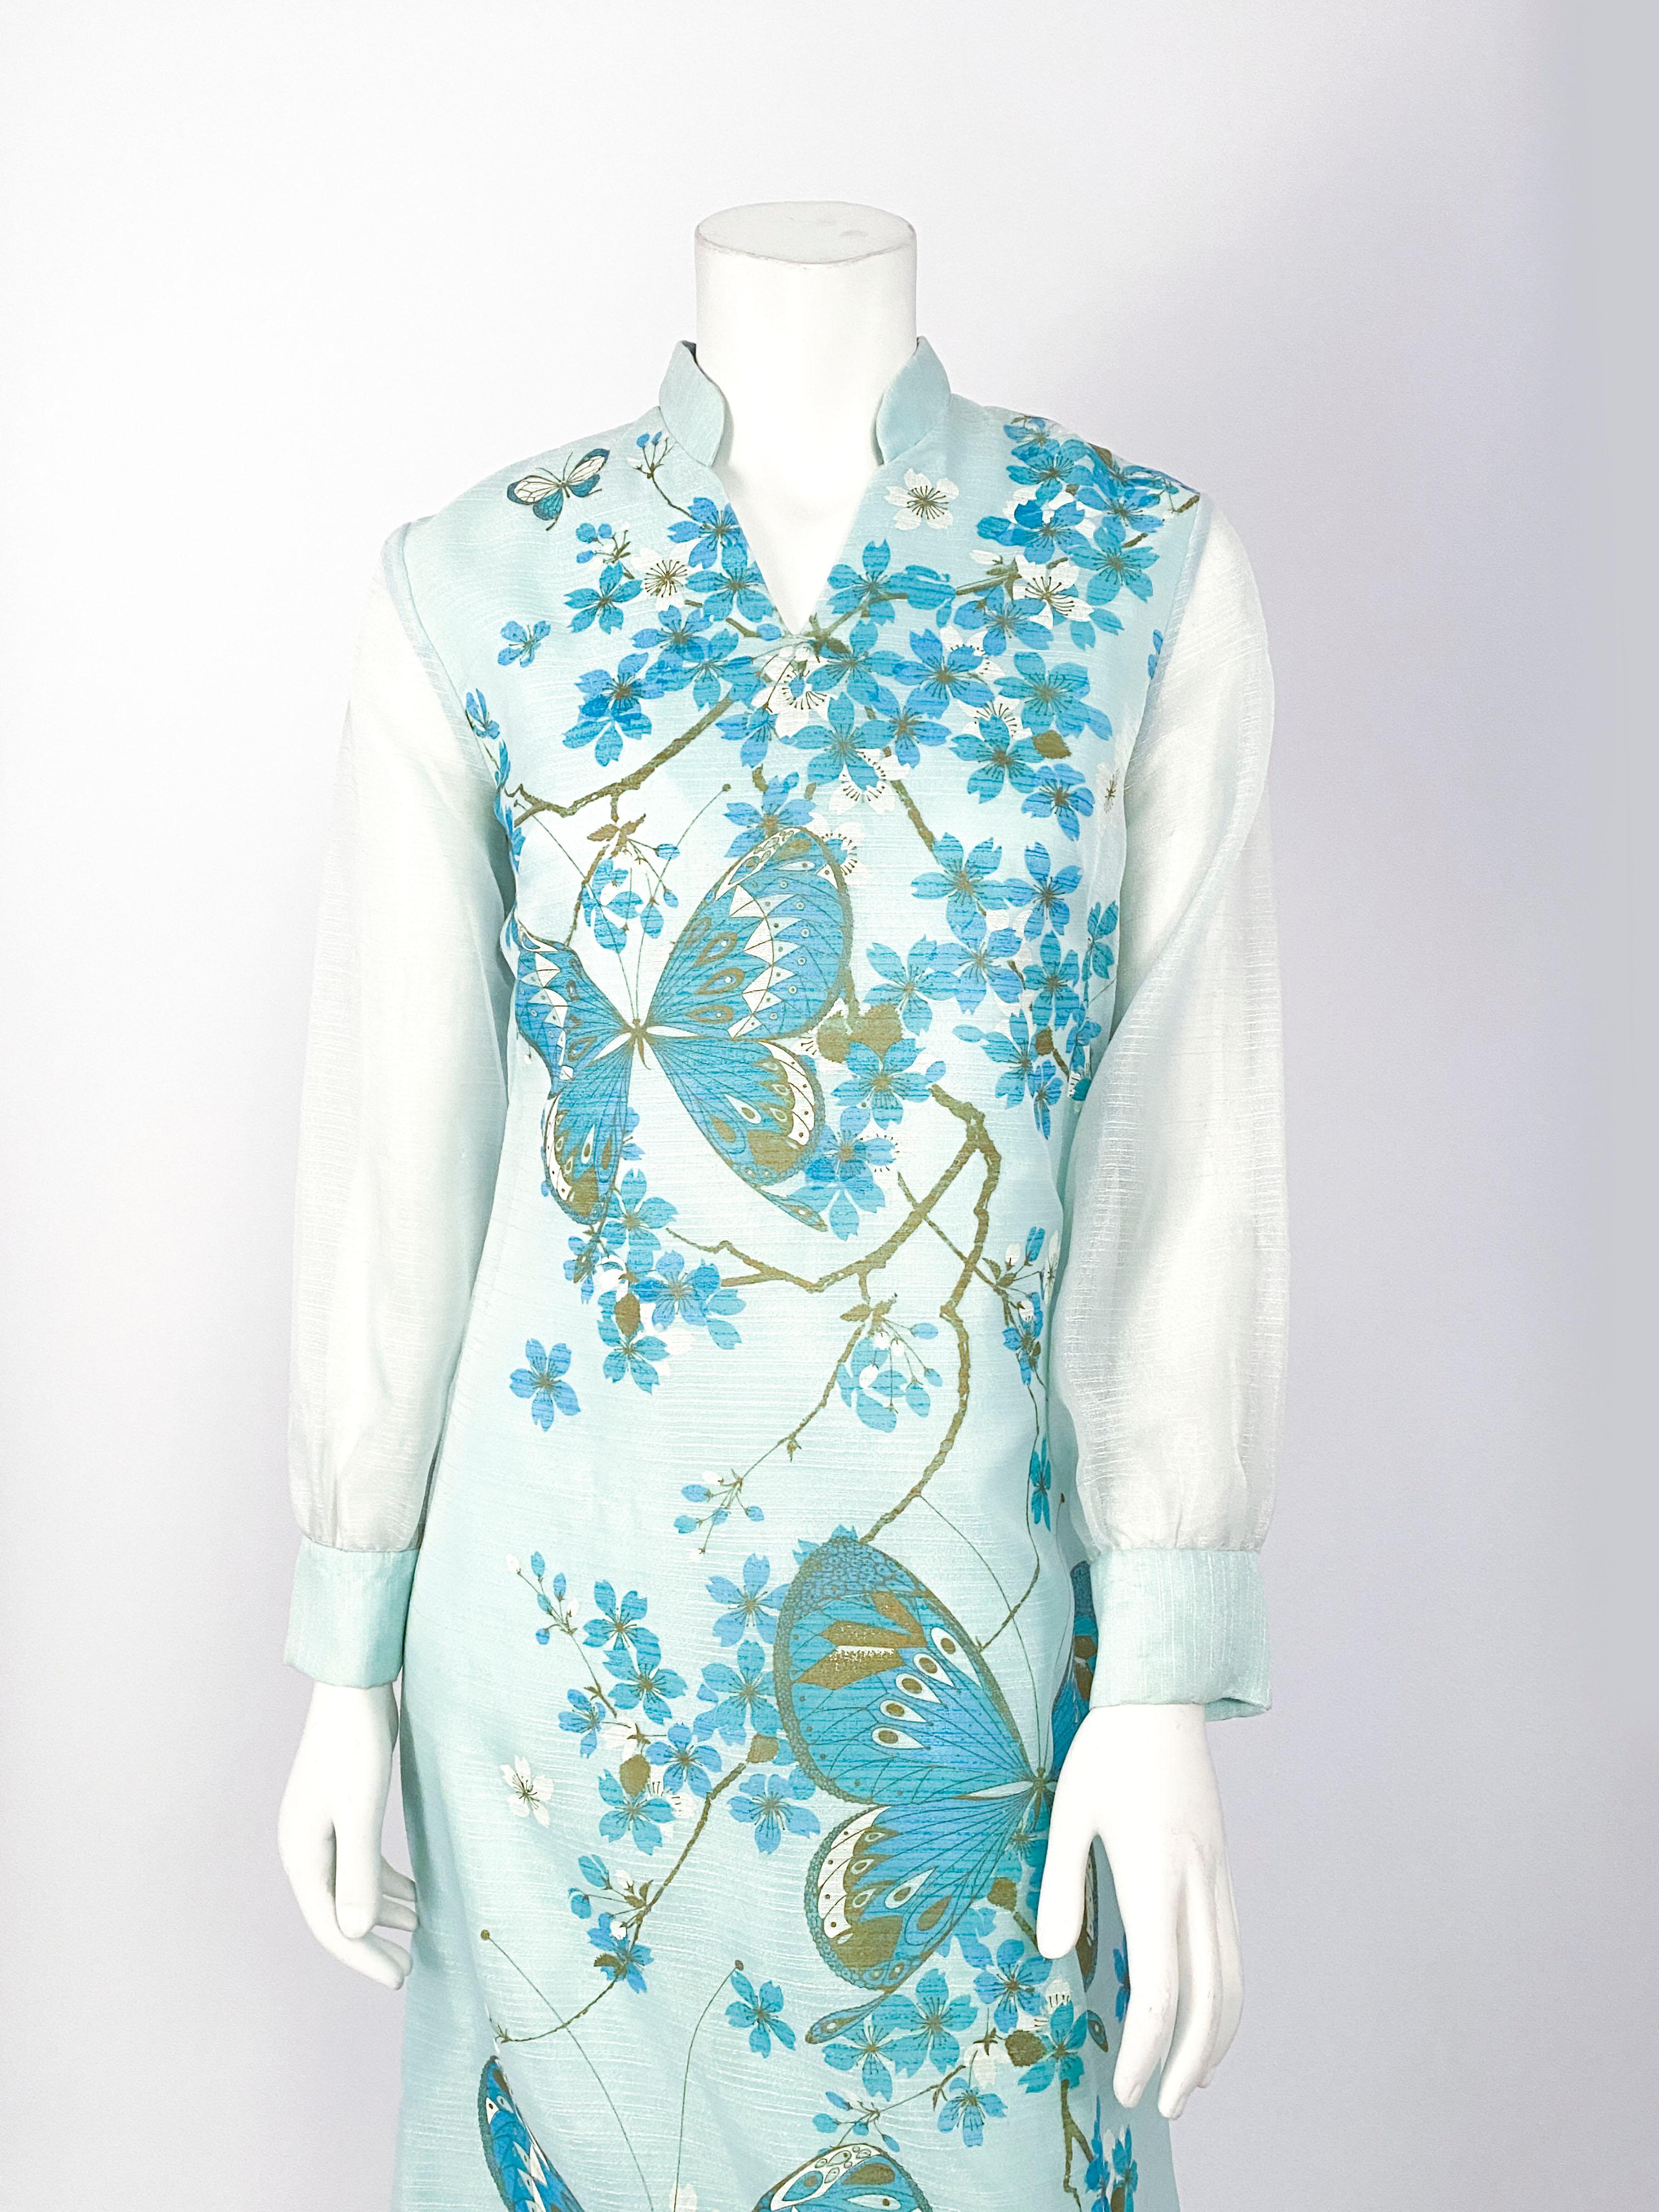 1970s Alfred Shaheen aqua blue Hawaiian painted full-length dress featuring enlarged butterfly motifs. The shift silhouette is finished with a Mandarin neckline and sheer long cuffed sleeves.